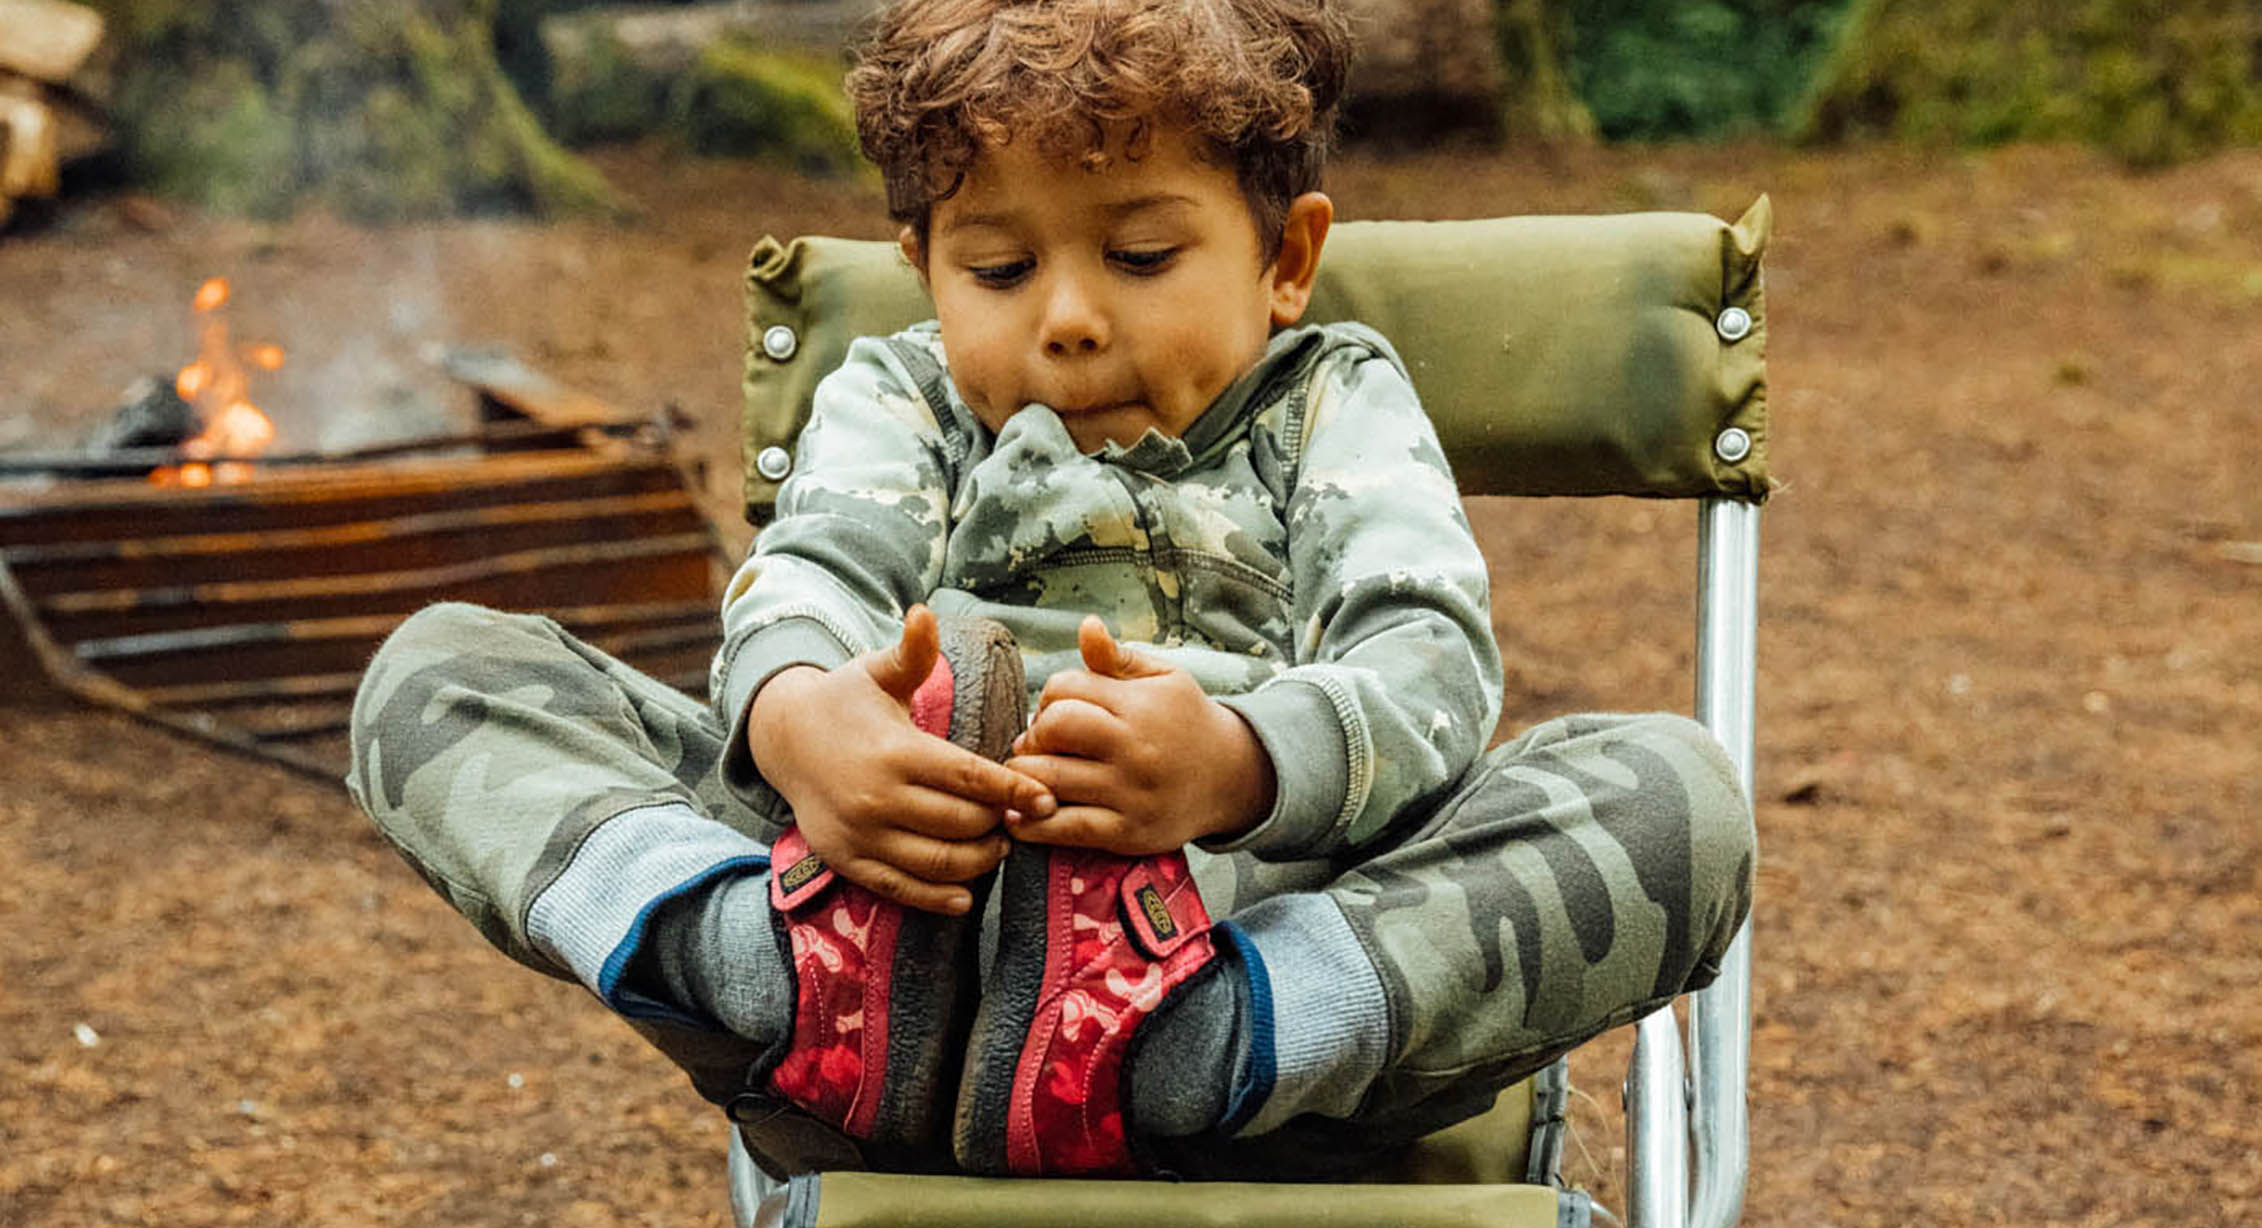 A toddler stretching in a camping chair outside